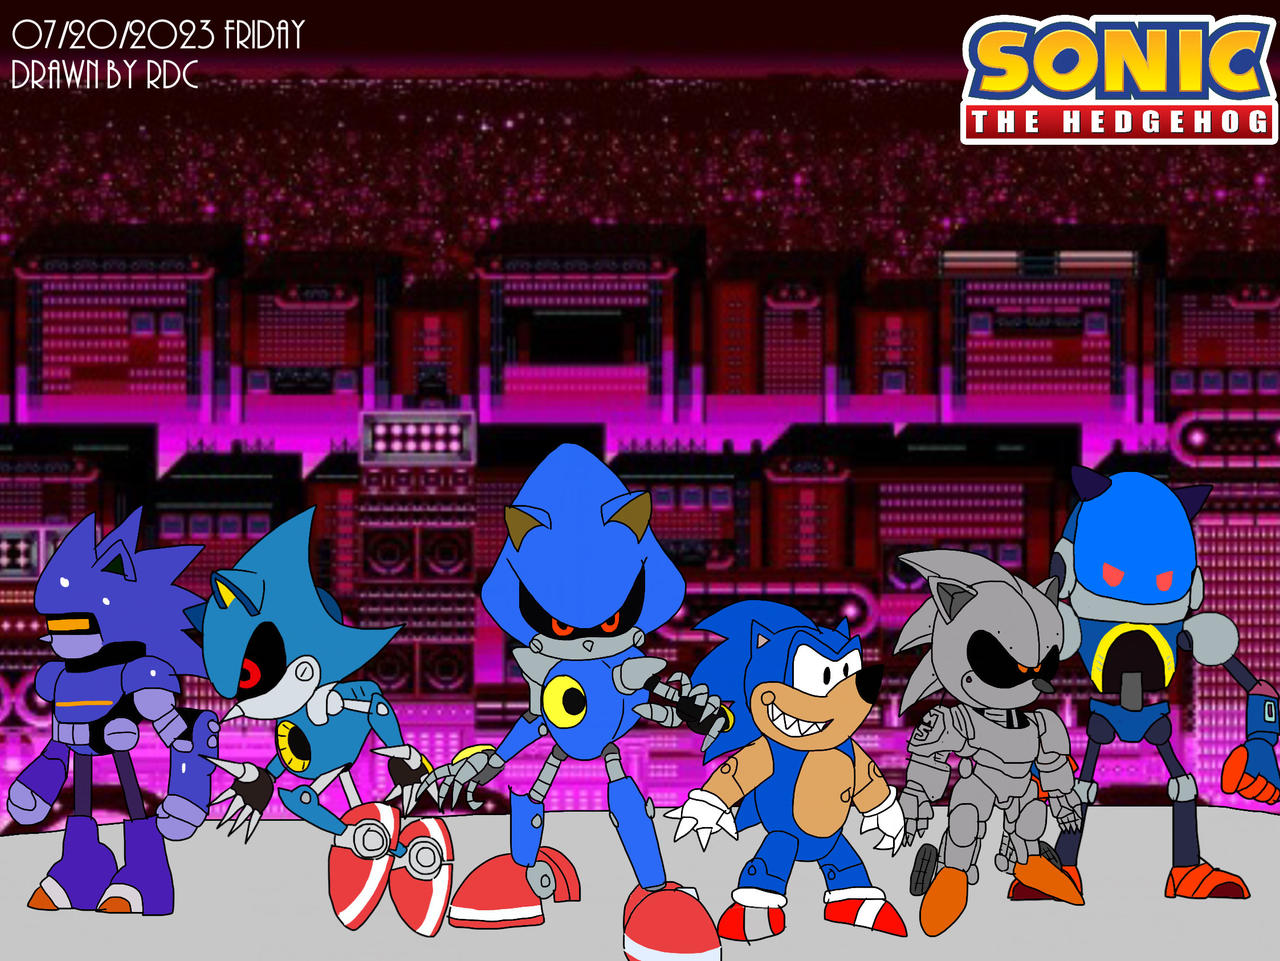 The Mecha Sonic Story ▸ All FOUR Versions Of Mecha Sonic 